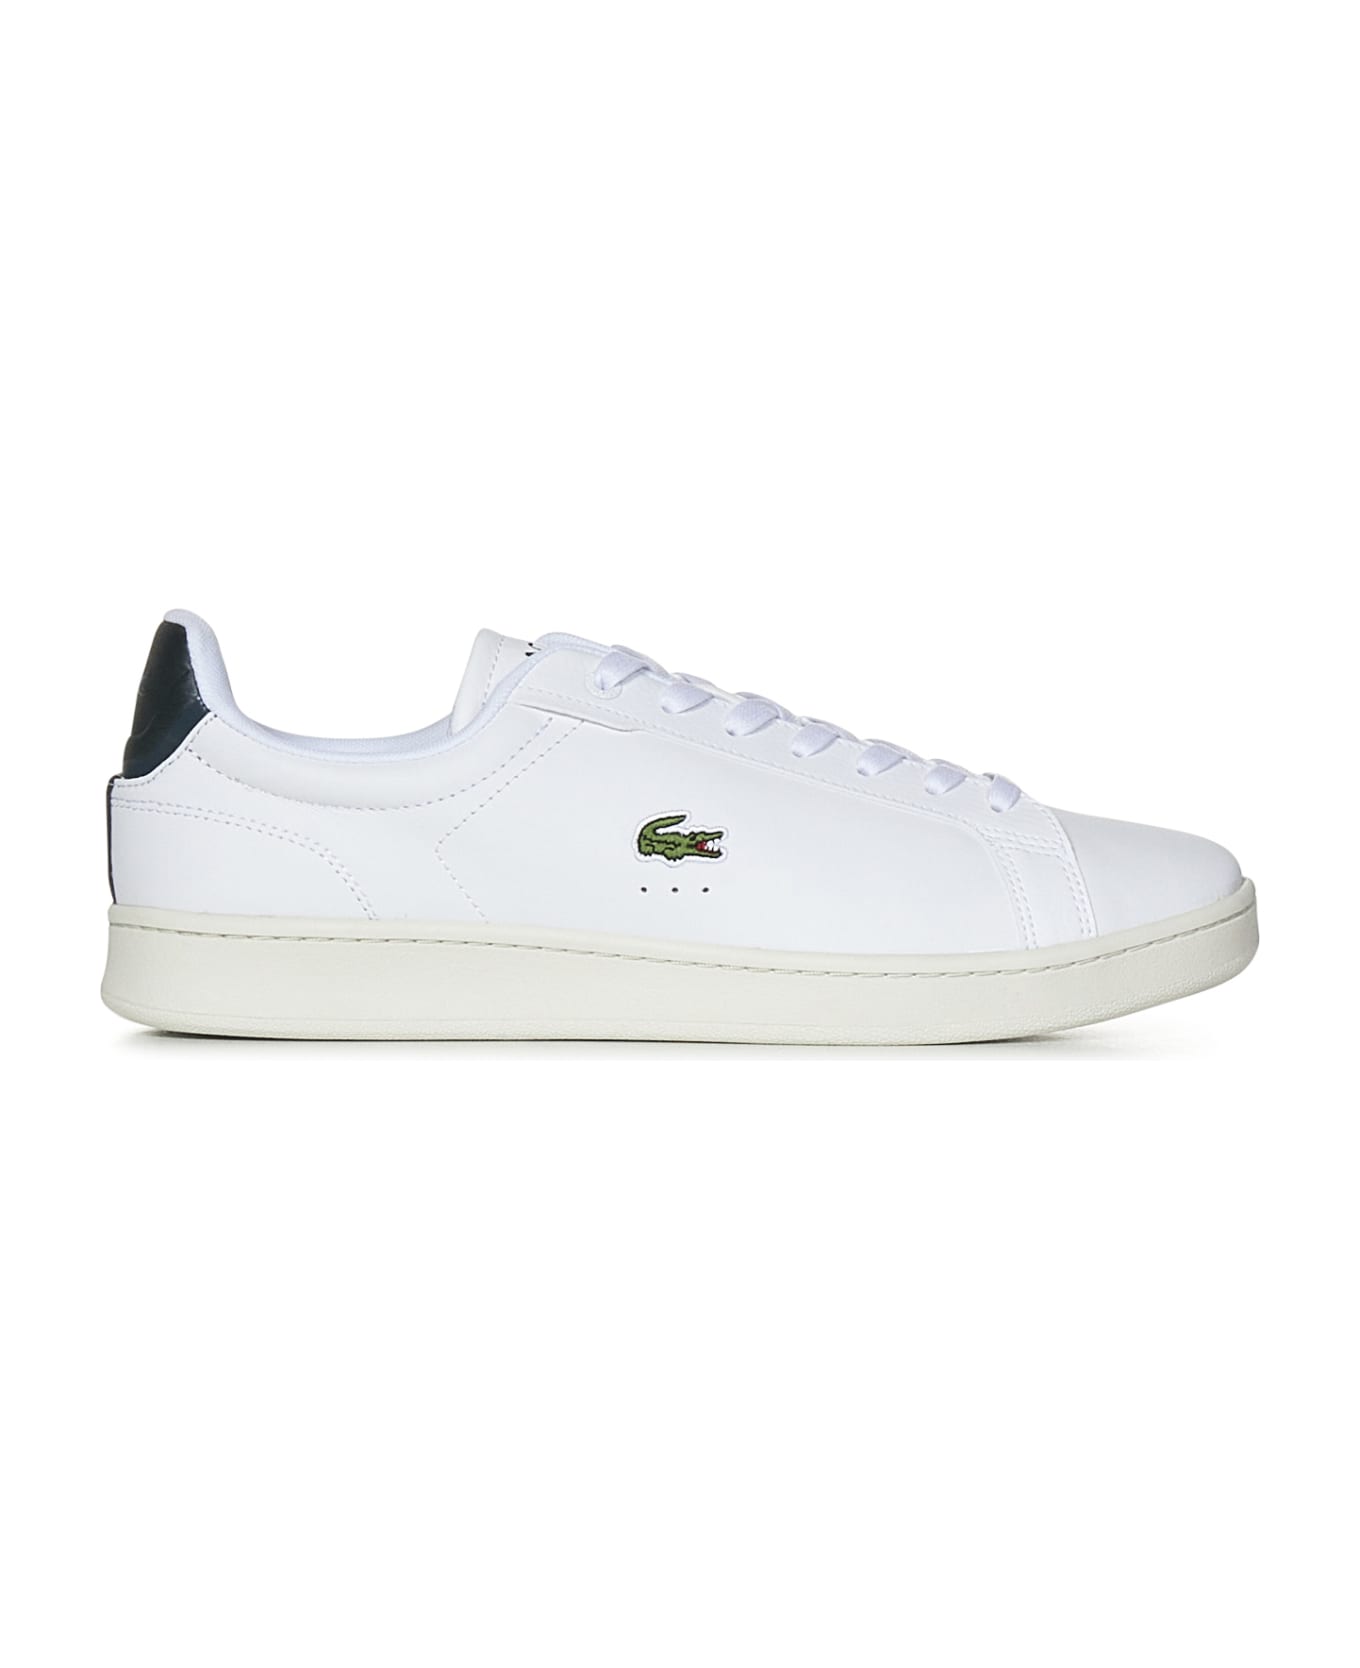 Lacoste Carnaby Pro Sneakers | italist